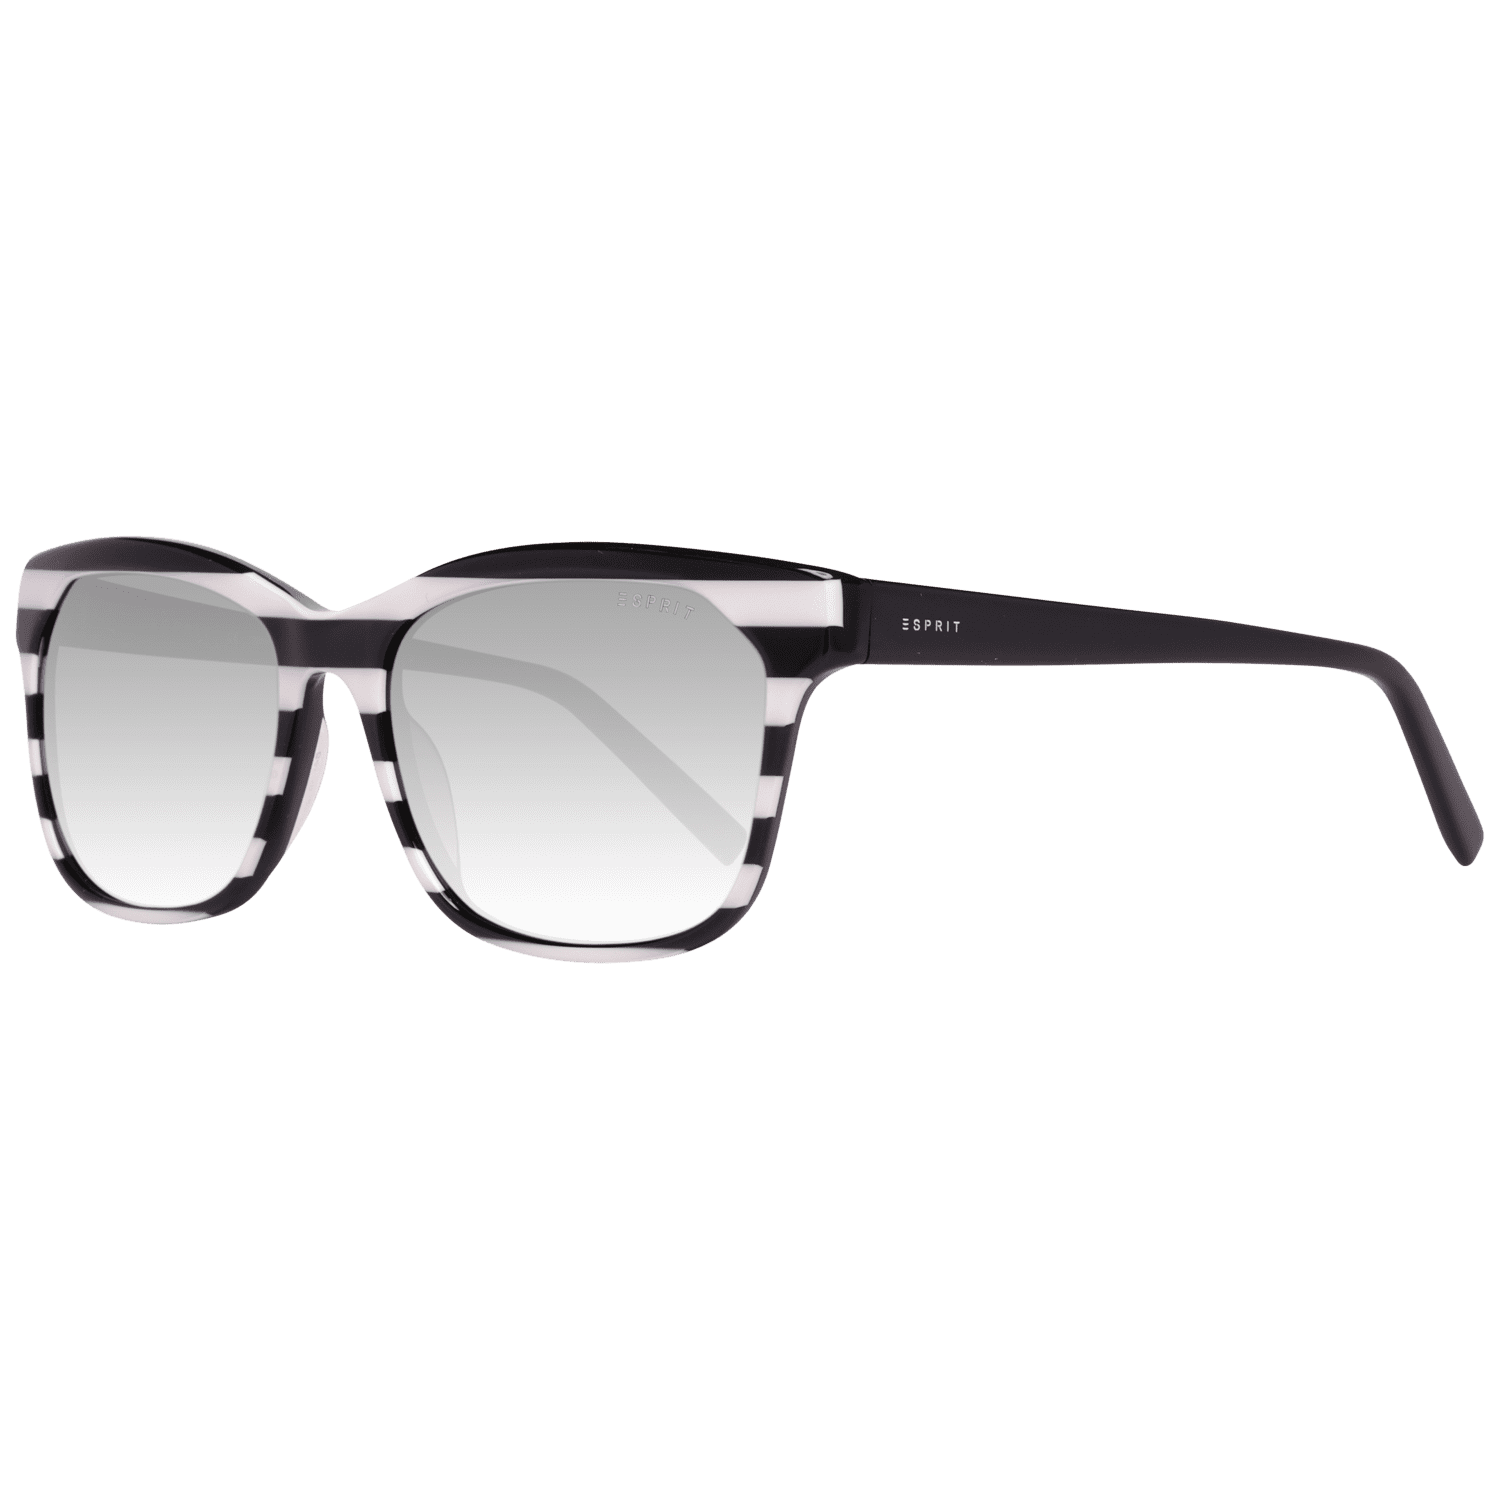 Pradco Yum Assorted Polarized Performance Sunglasses Male and Female, Adult